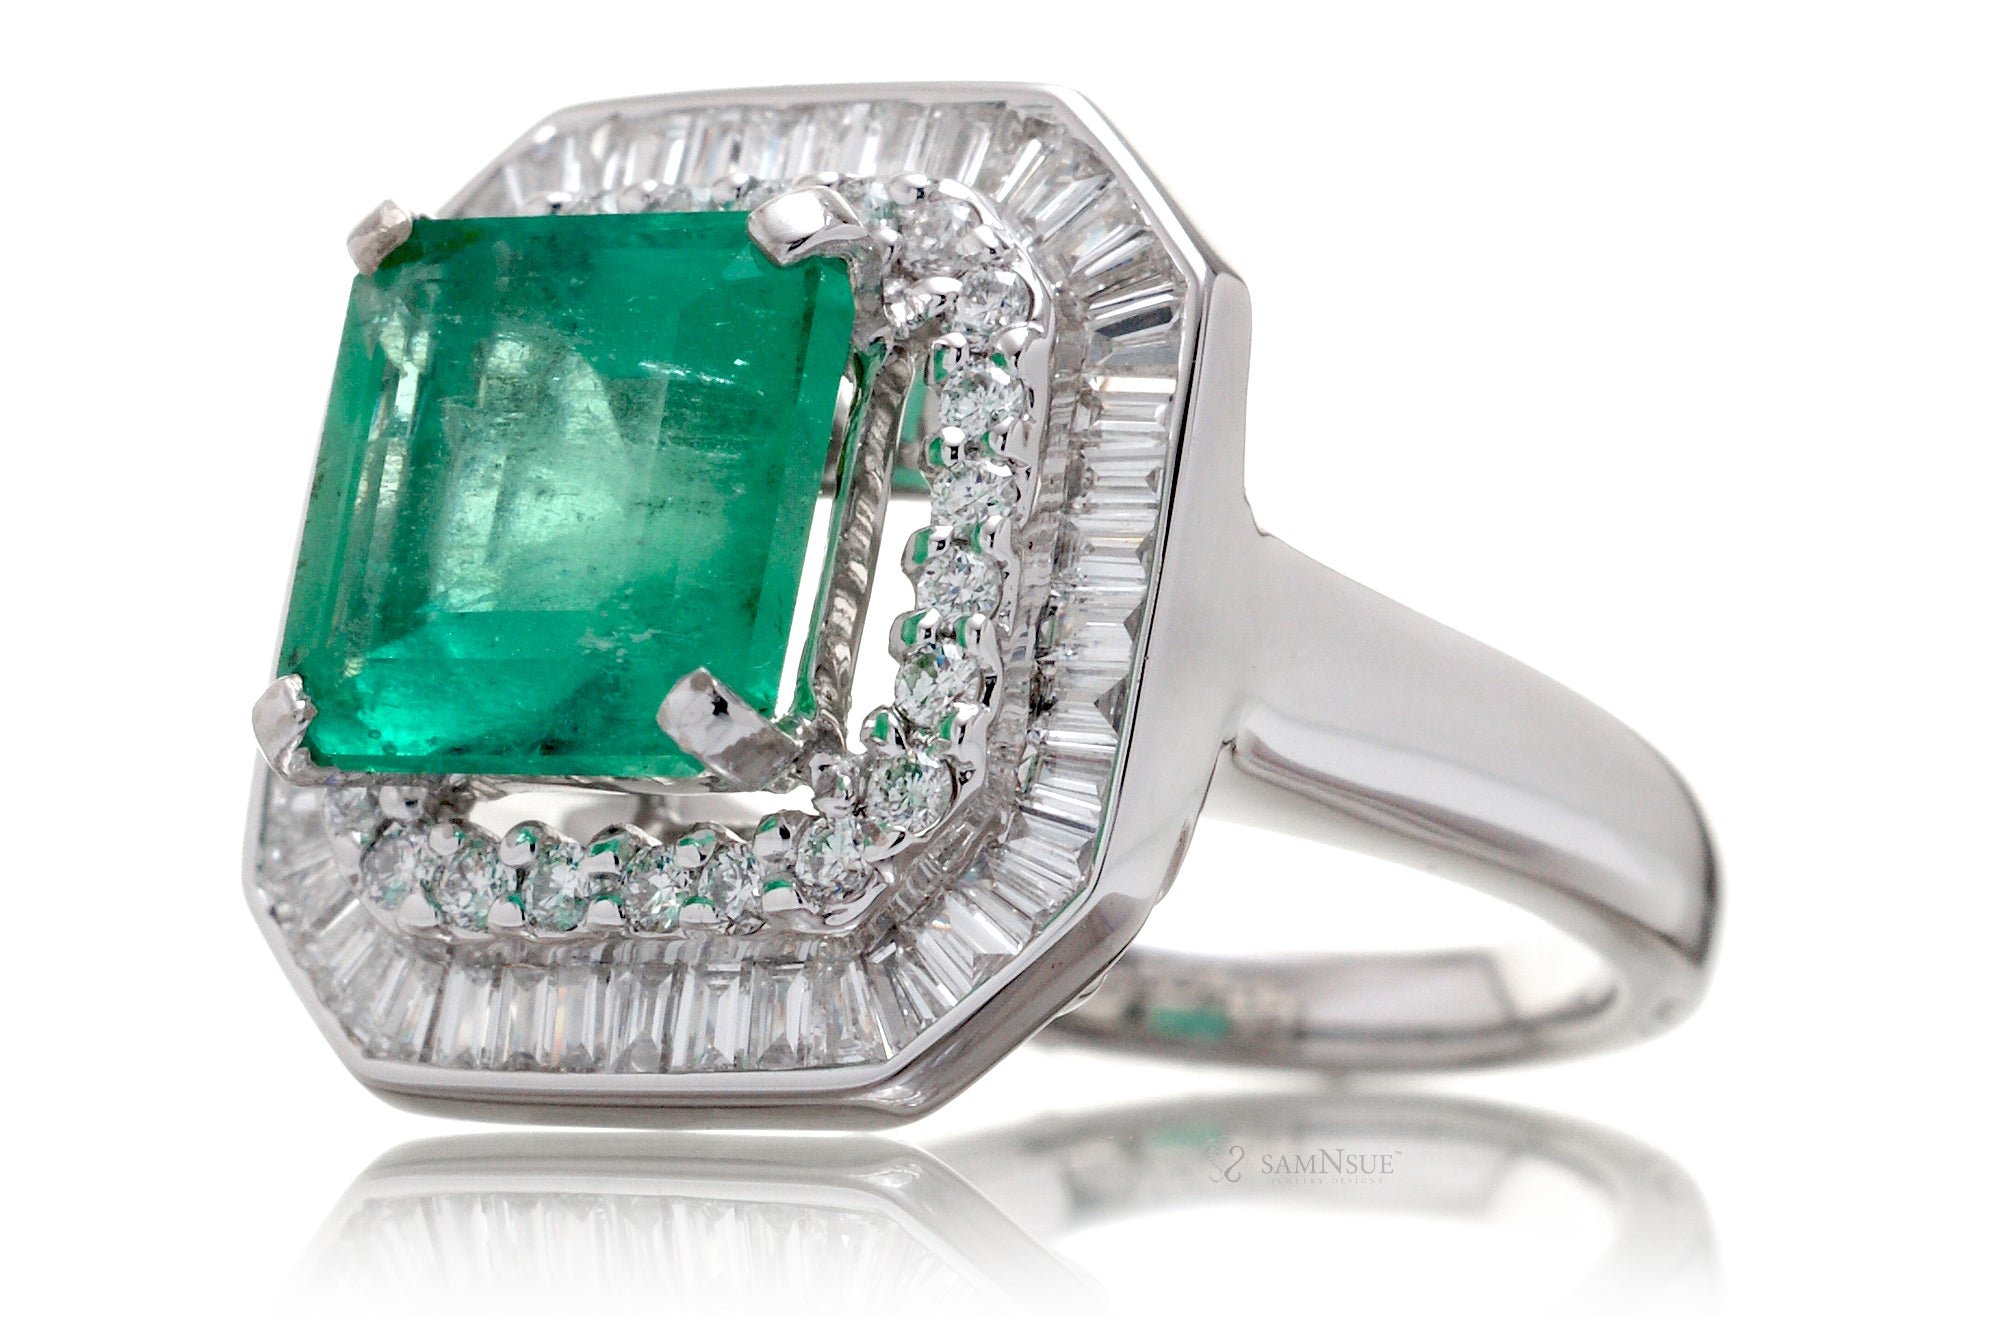 The best emerald-cut engagement rings